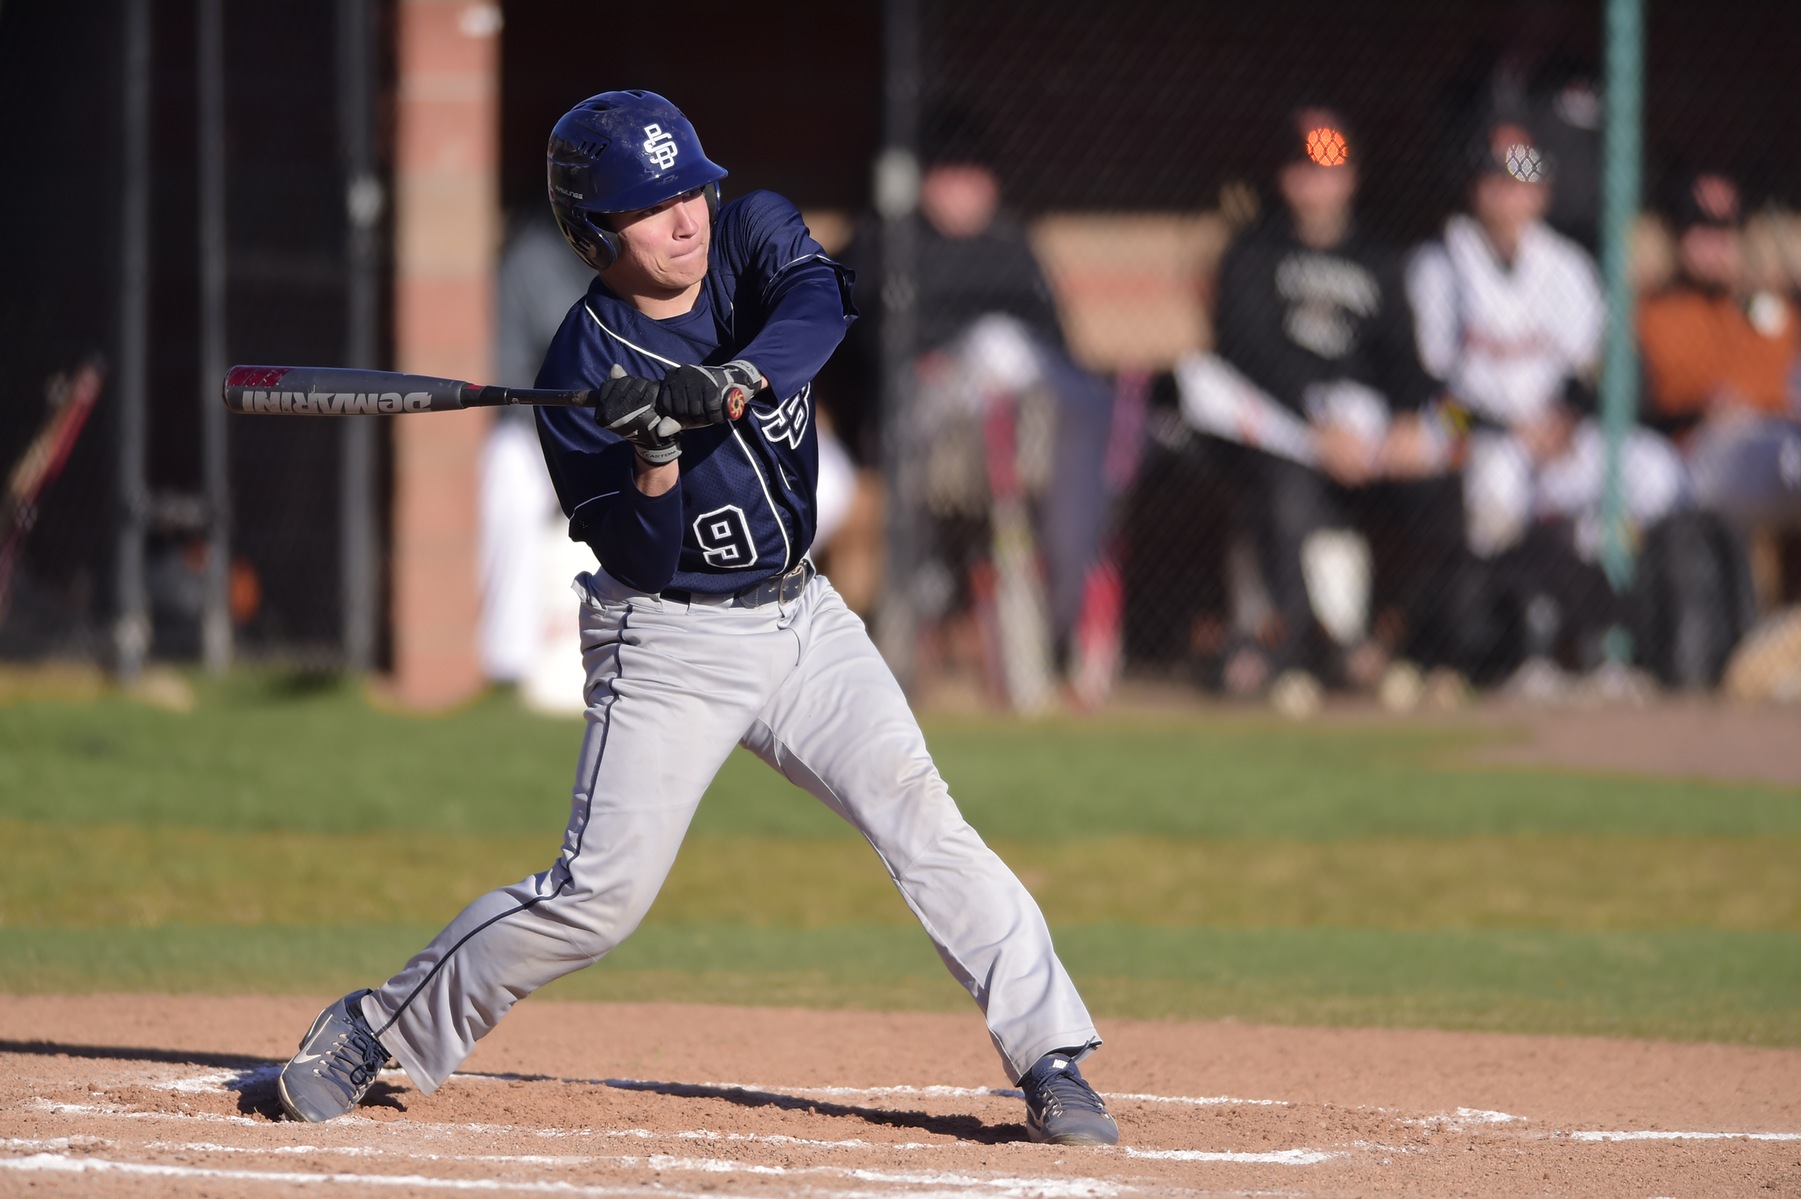 Baseball Picks Up Sweep Over D'Youville